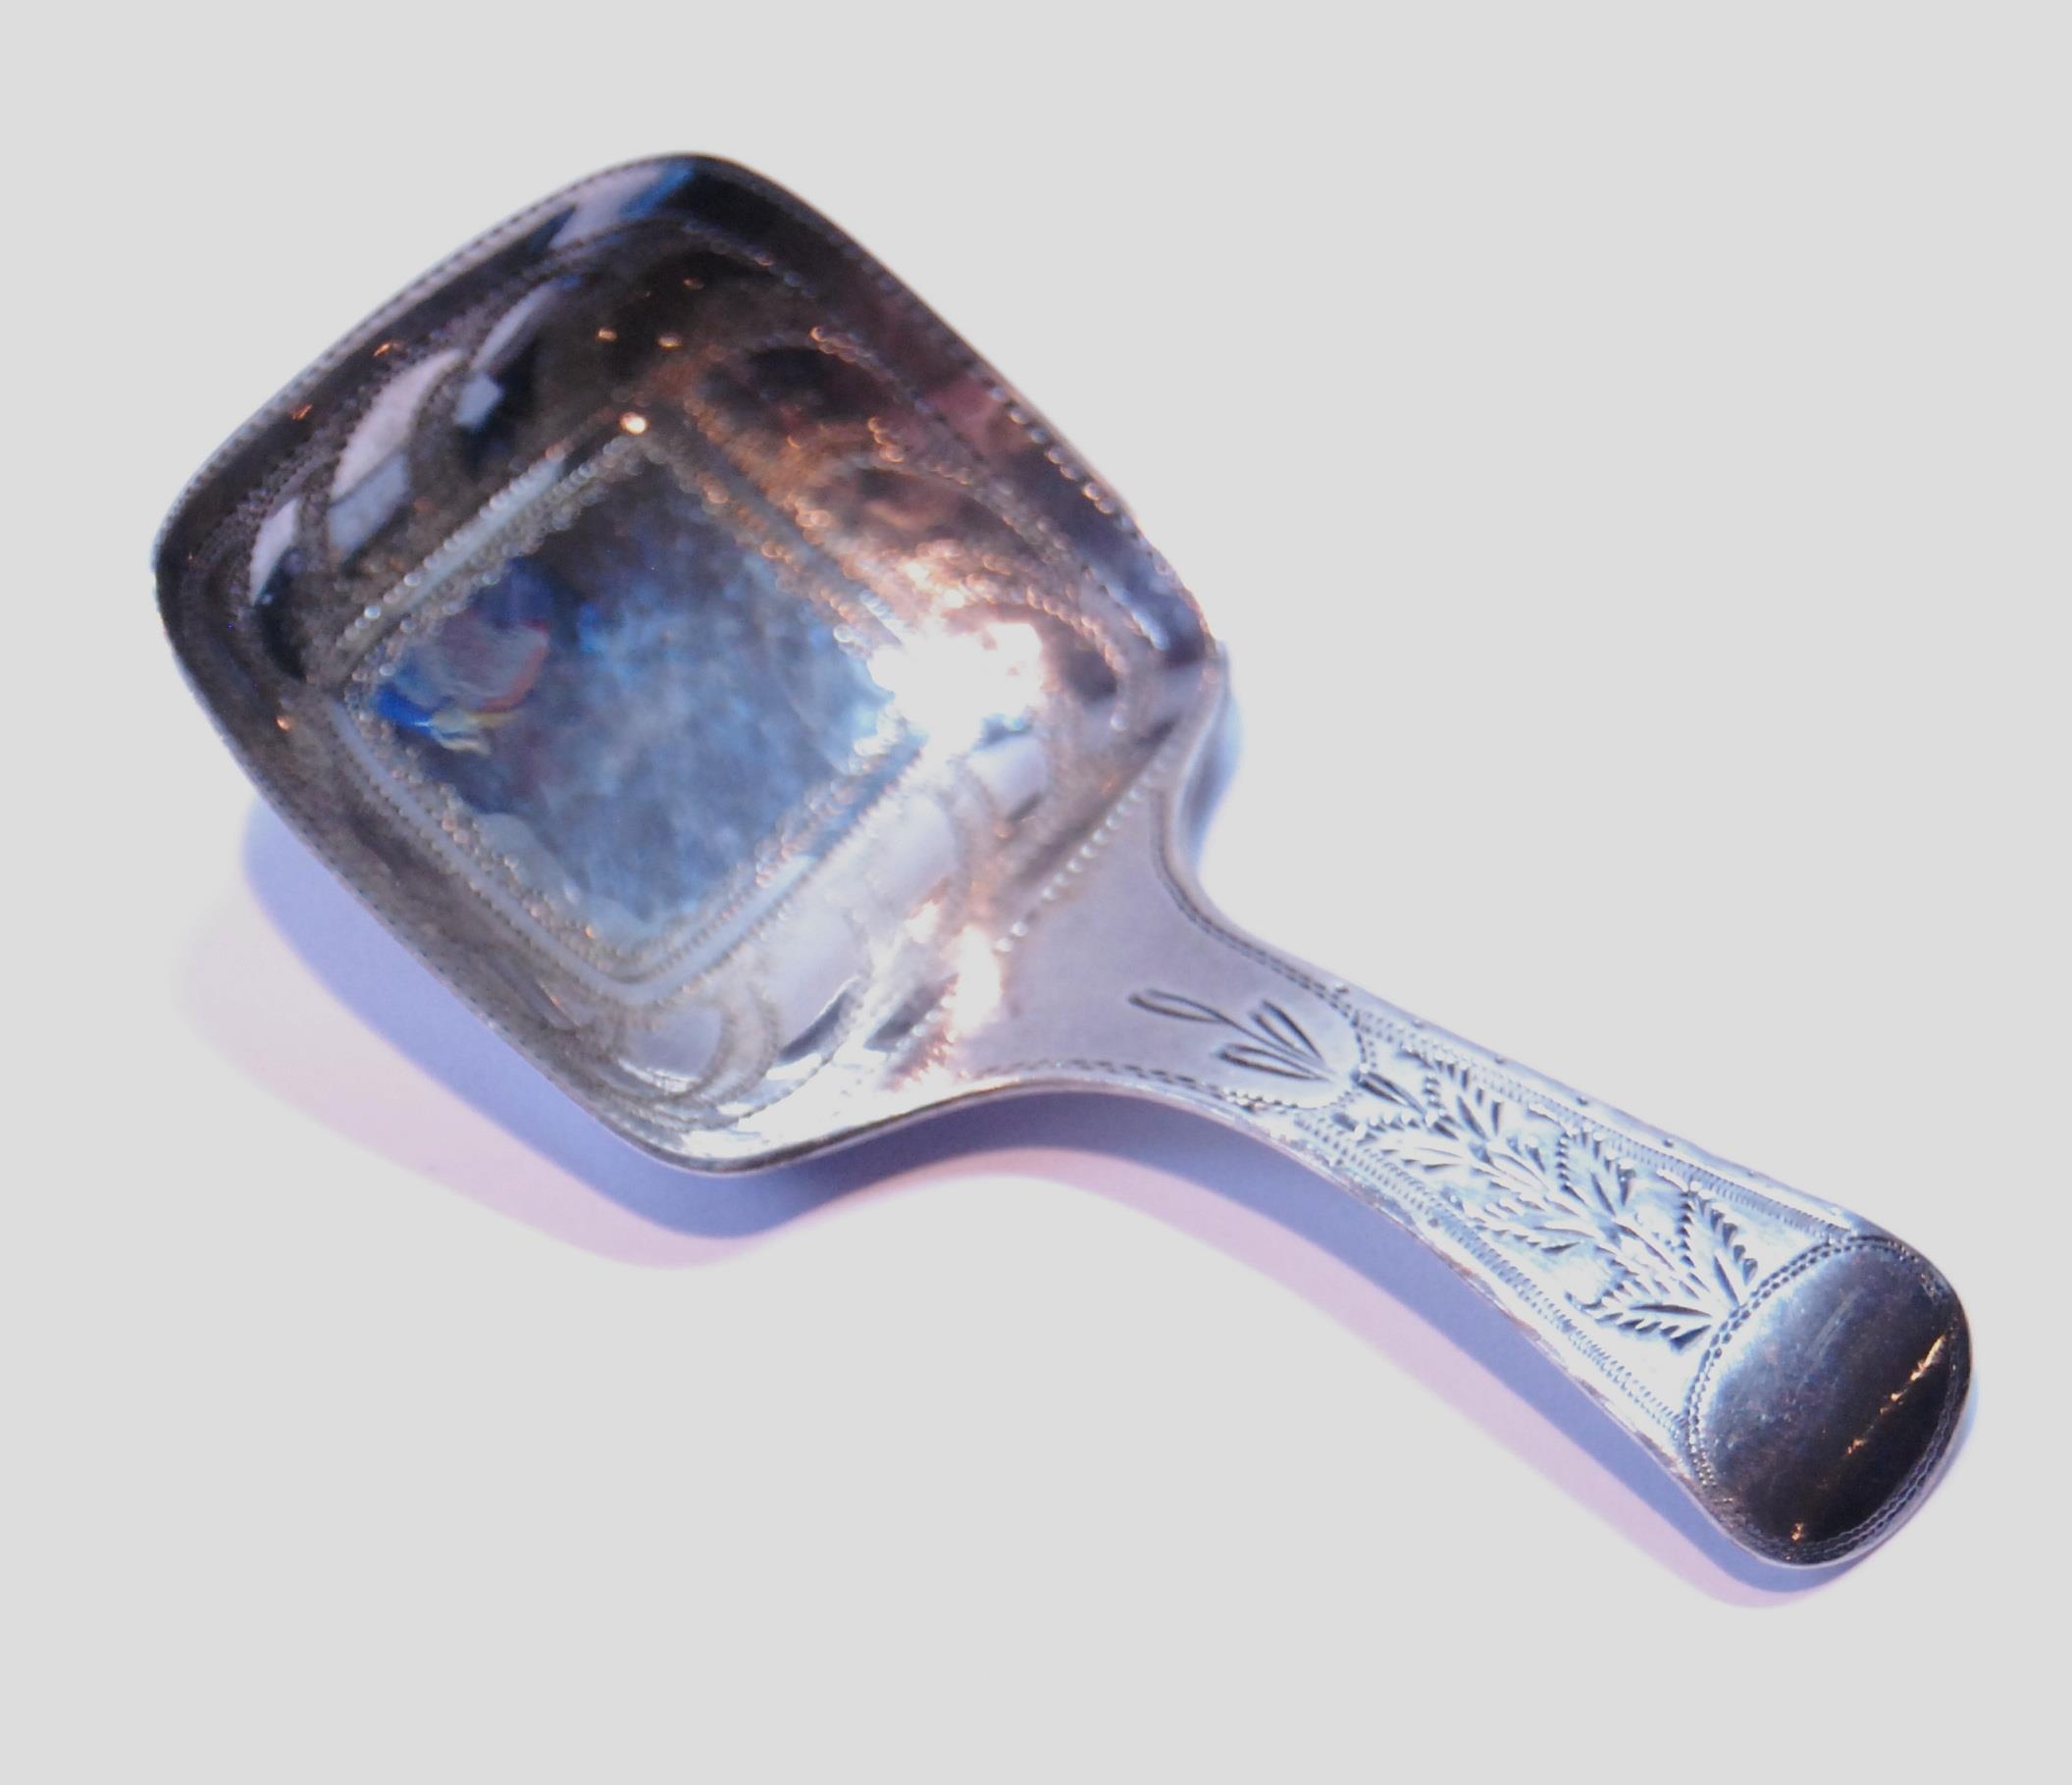 Silver caddy spoon with engraved rectangular bowl, by Joseph Willmore, Birmingham c. 1815.